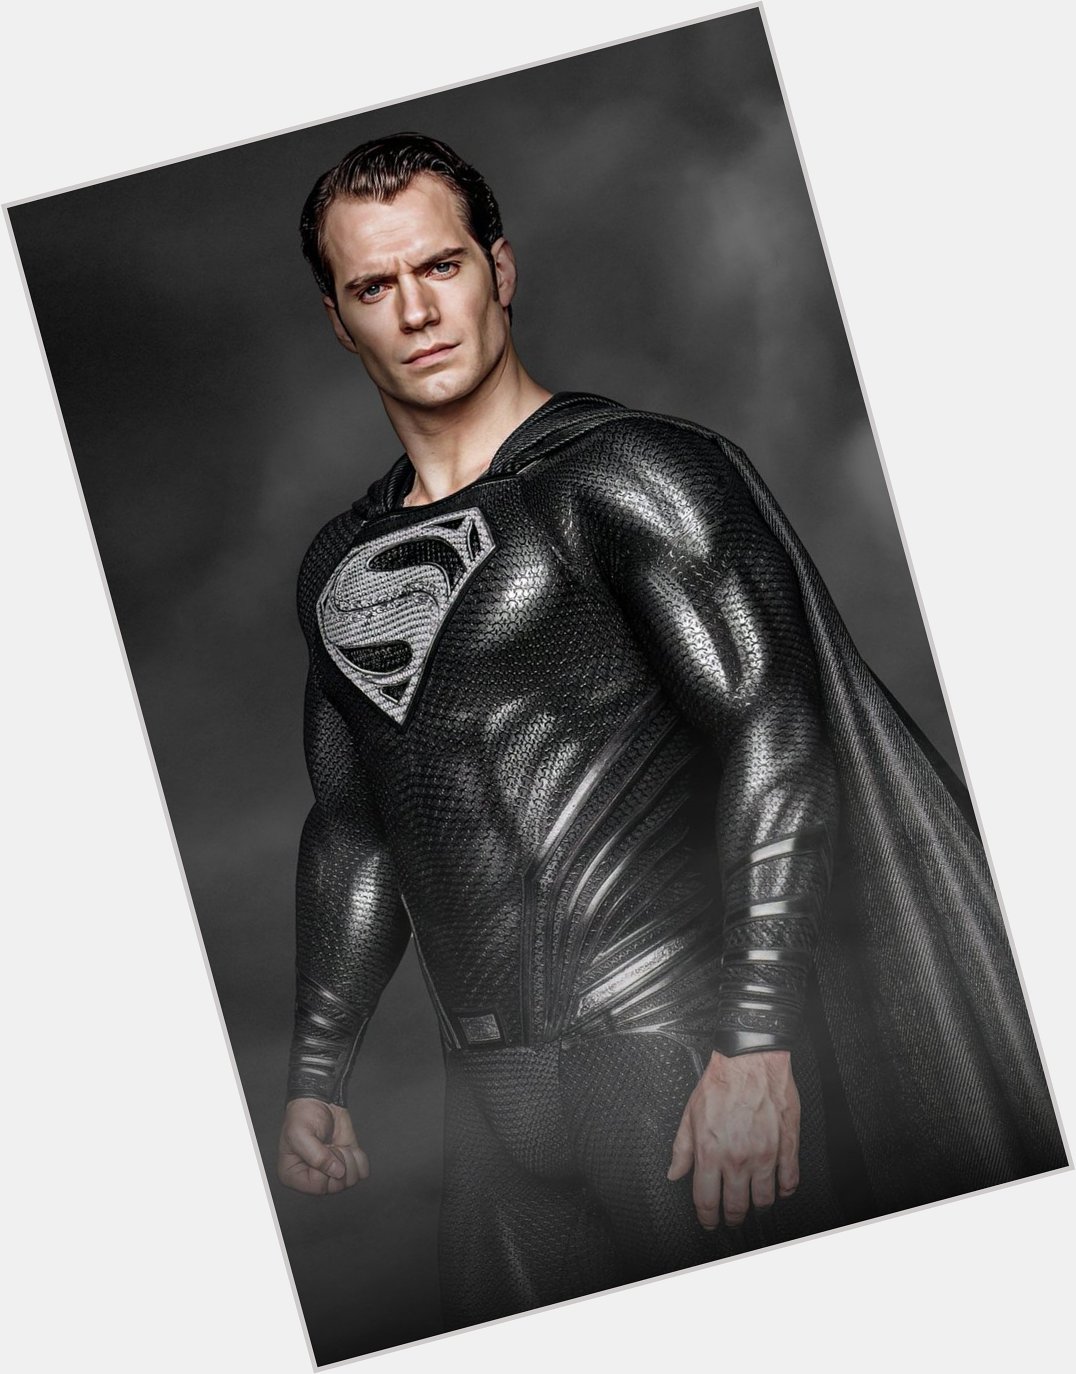 Your Superman
My Superman 
Our Superman 
Happy Birthday Henry Cavill  